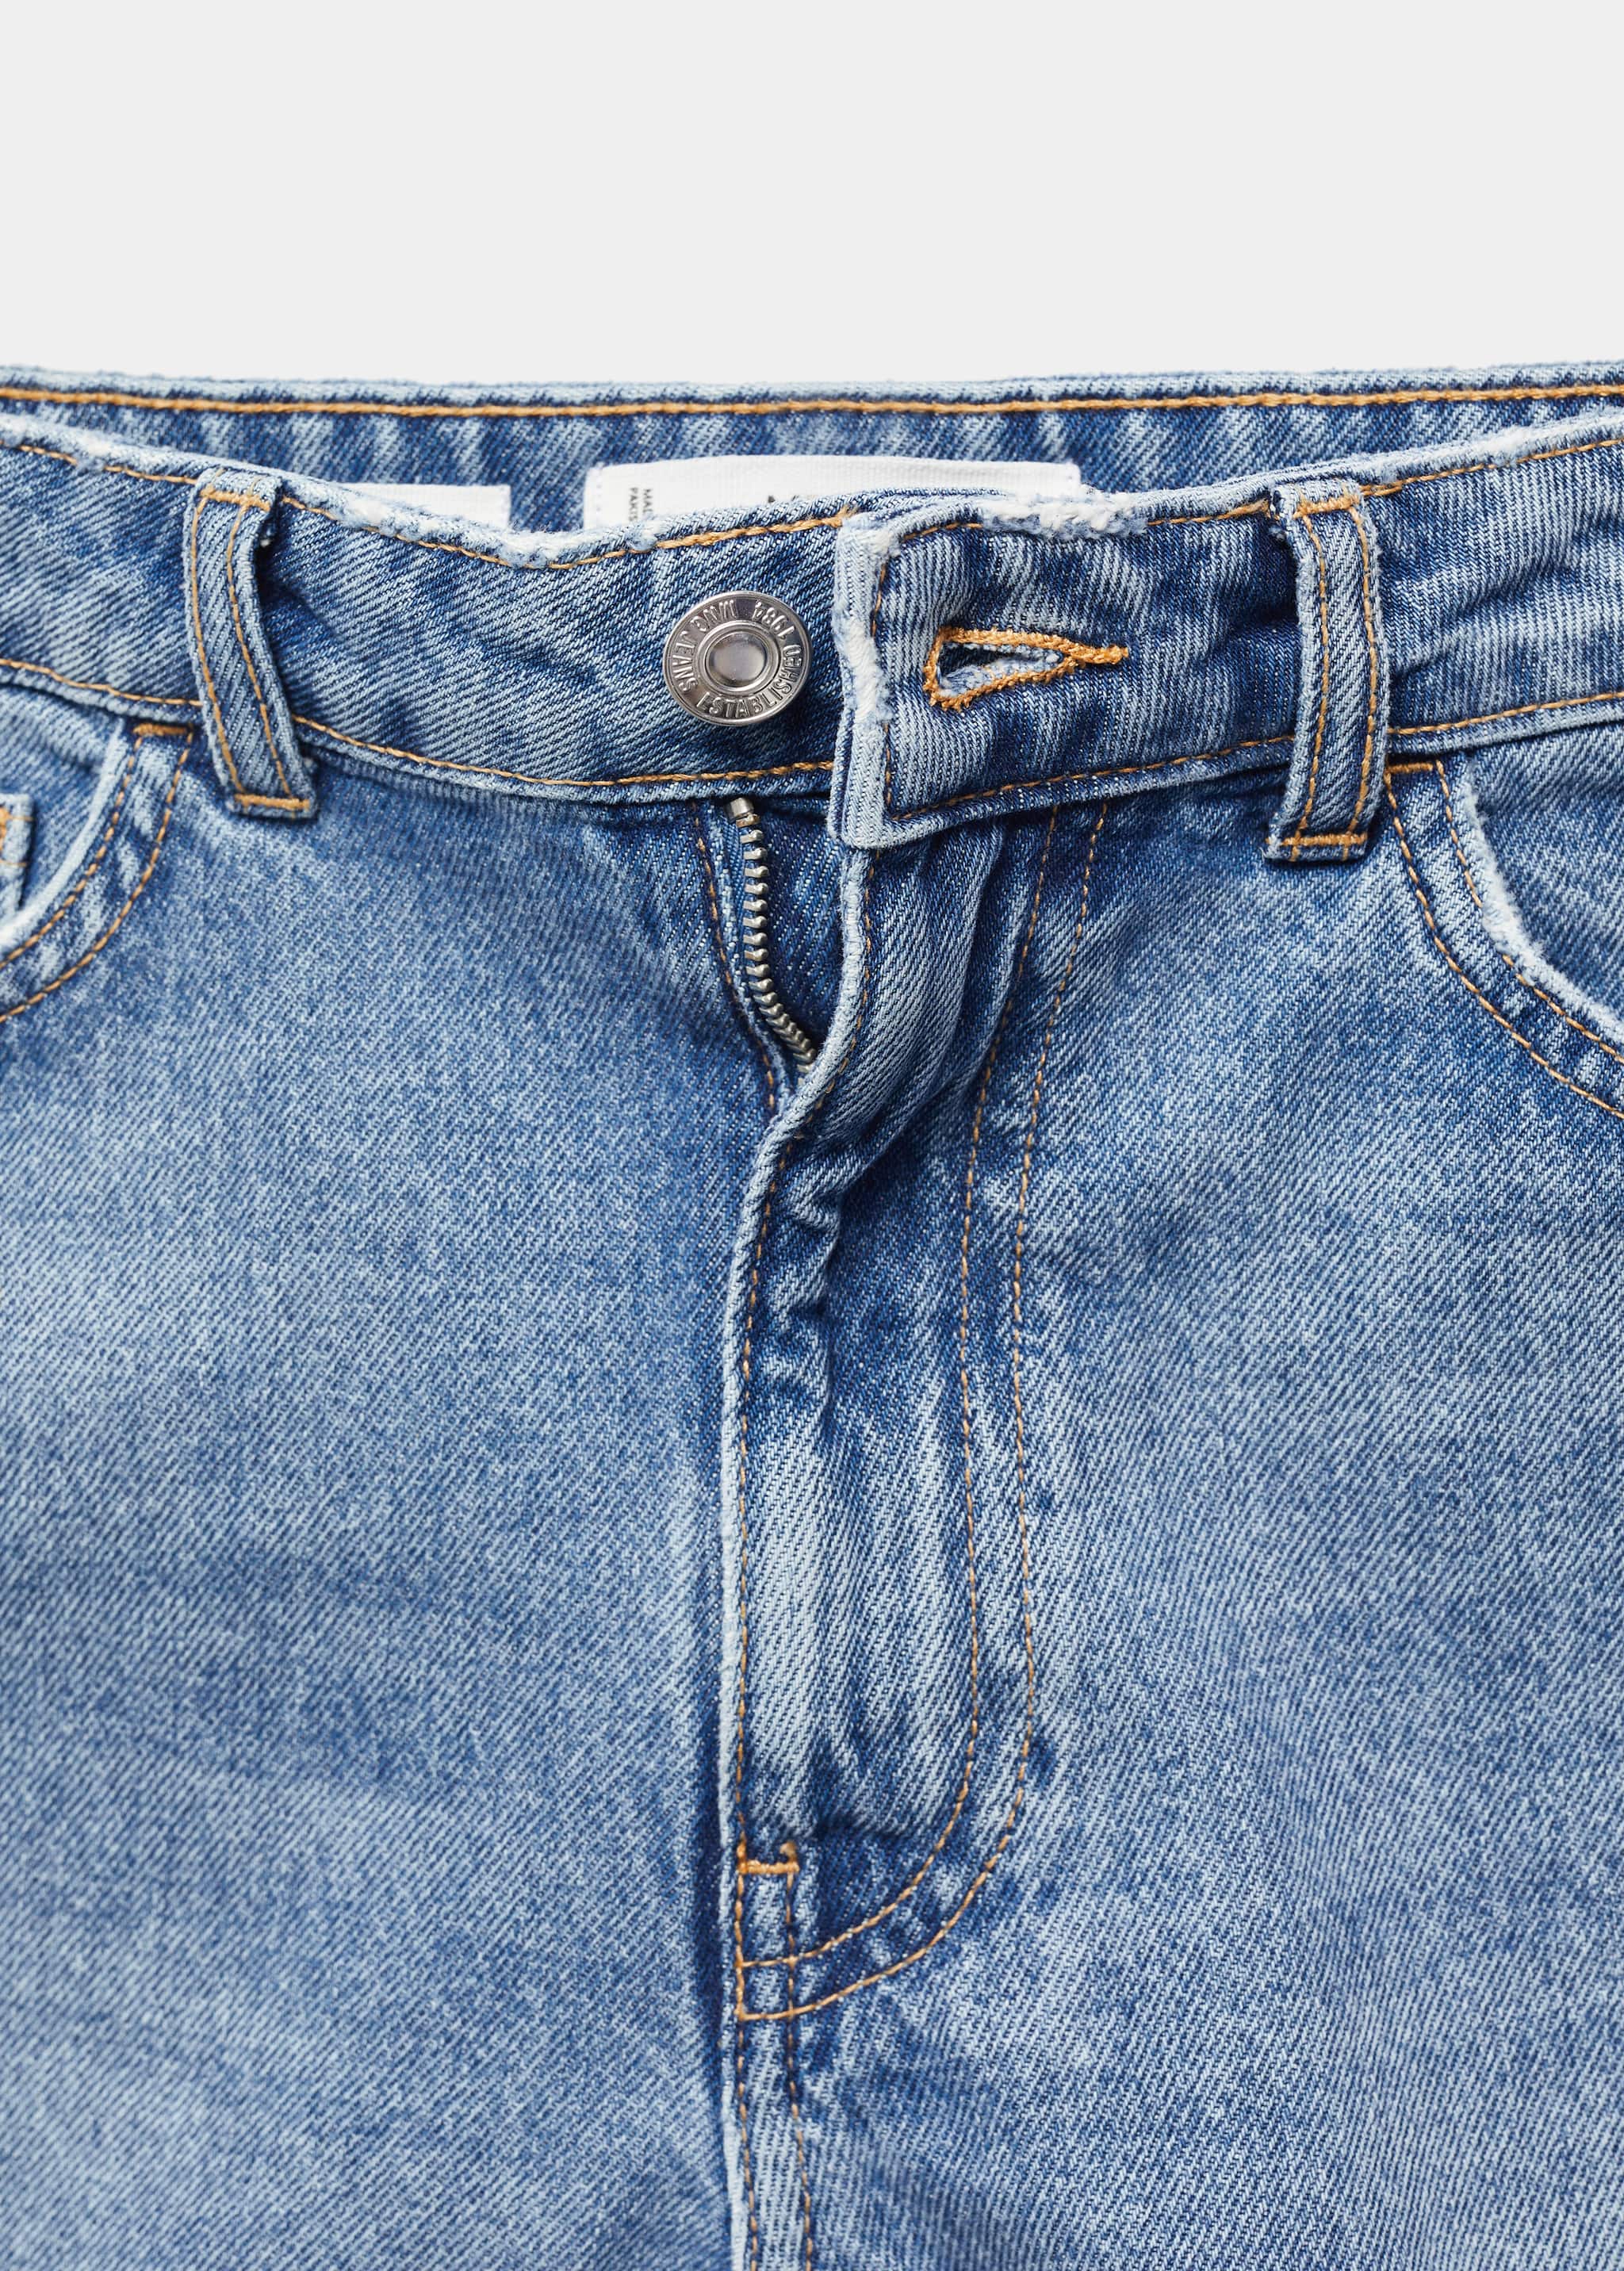 Mom-fit denim shorts - Details of the article 8